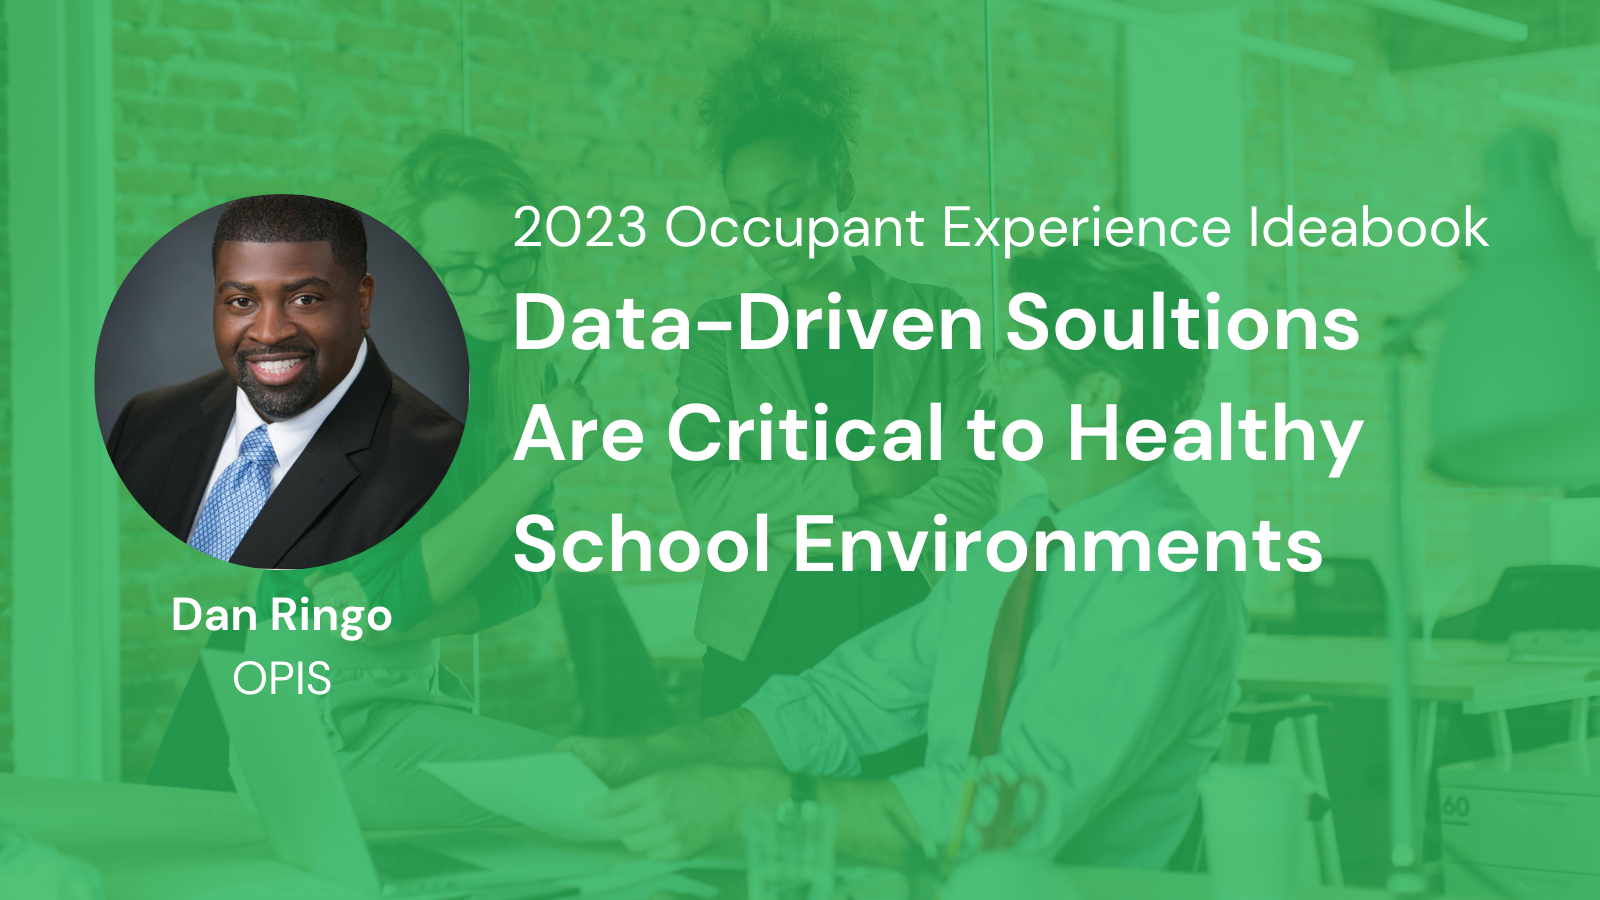 Data-Driven Solutions are Critical to Healthy School Environments